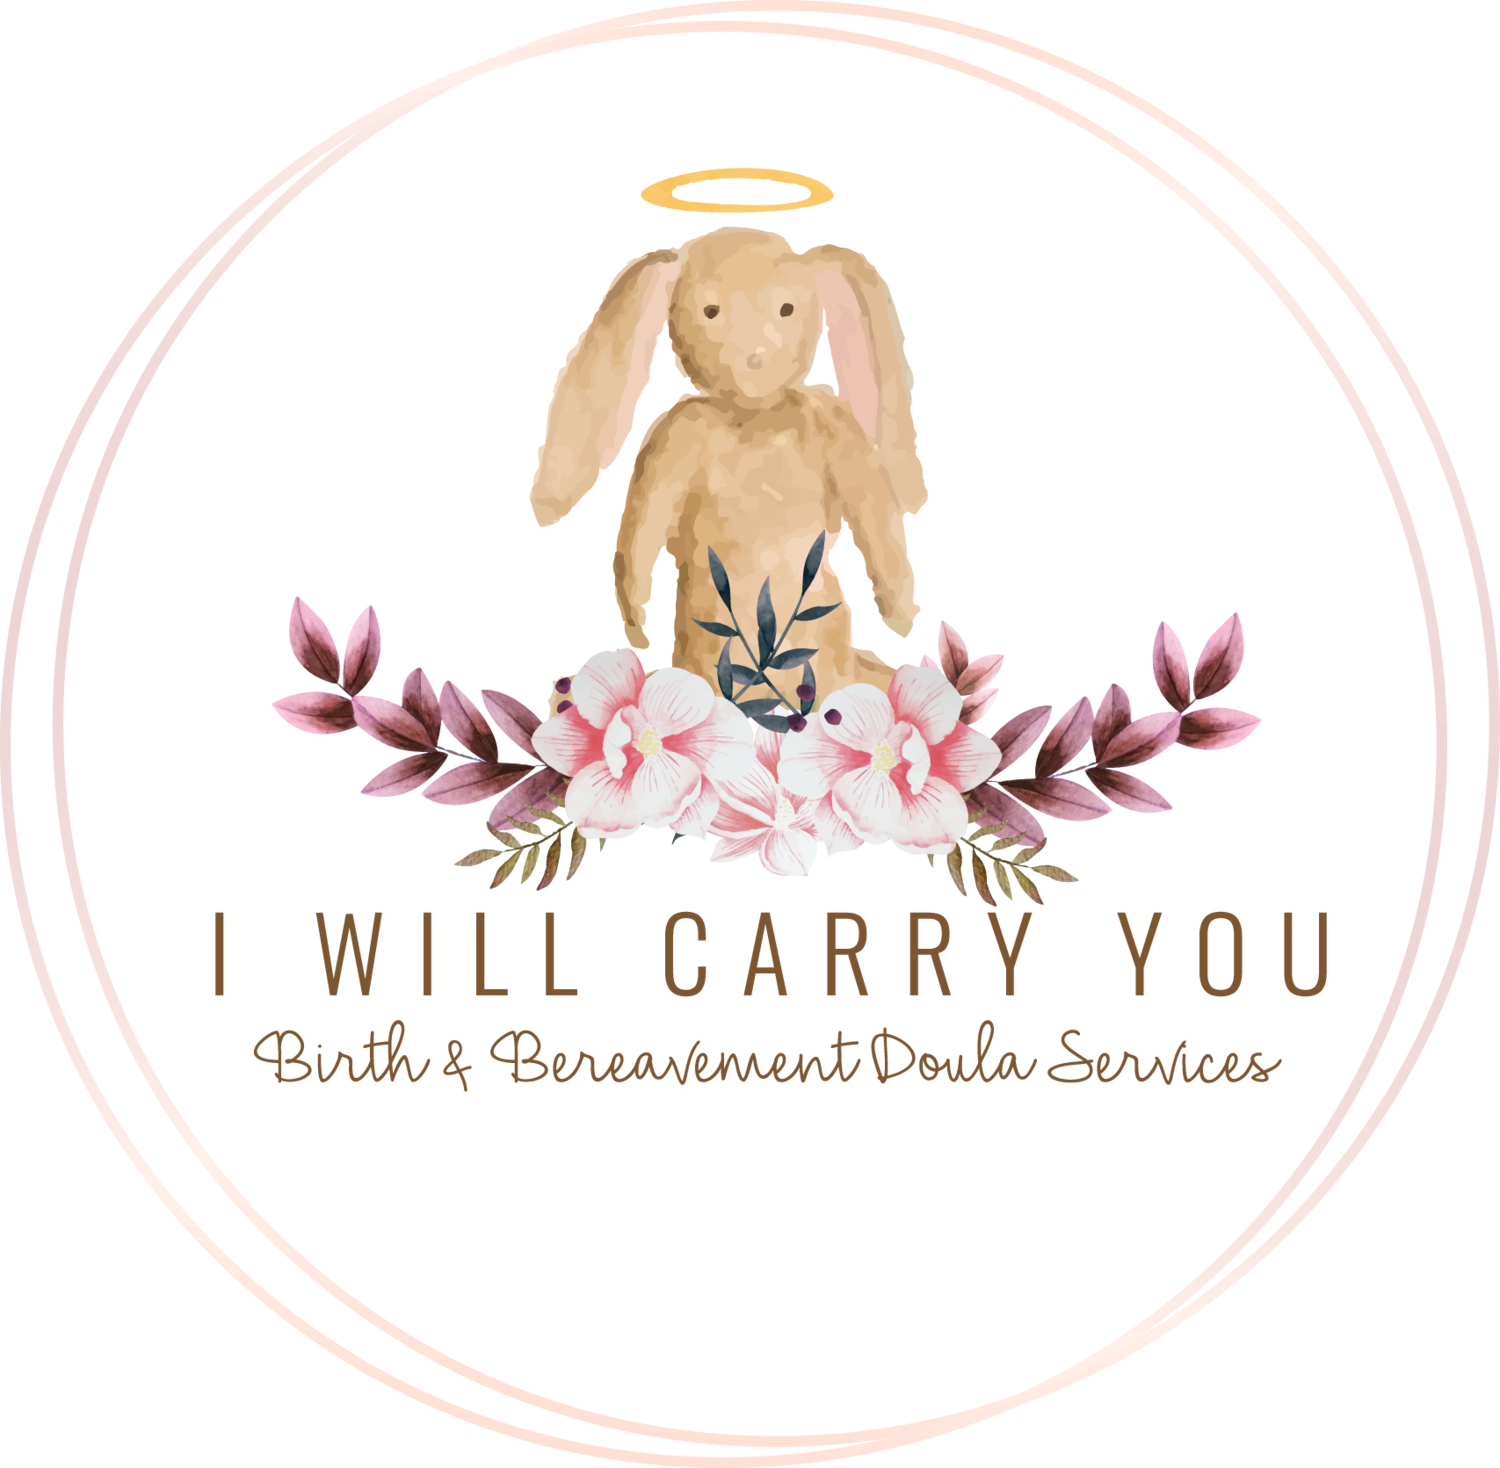 I Will Carry You: Birth &amp; Bereavement Doula Services